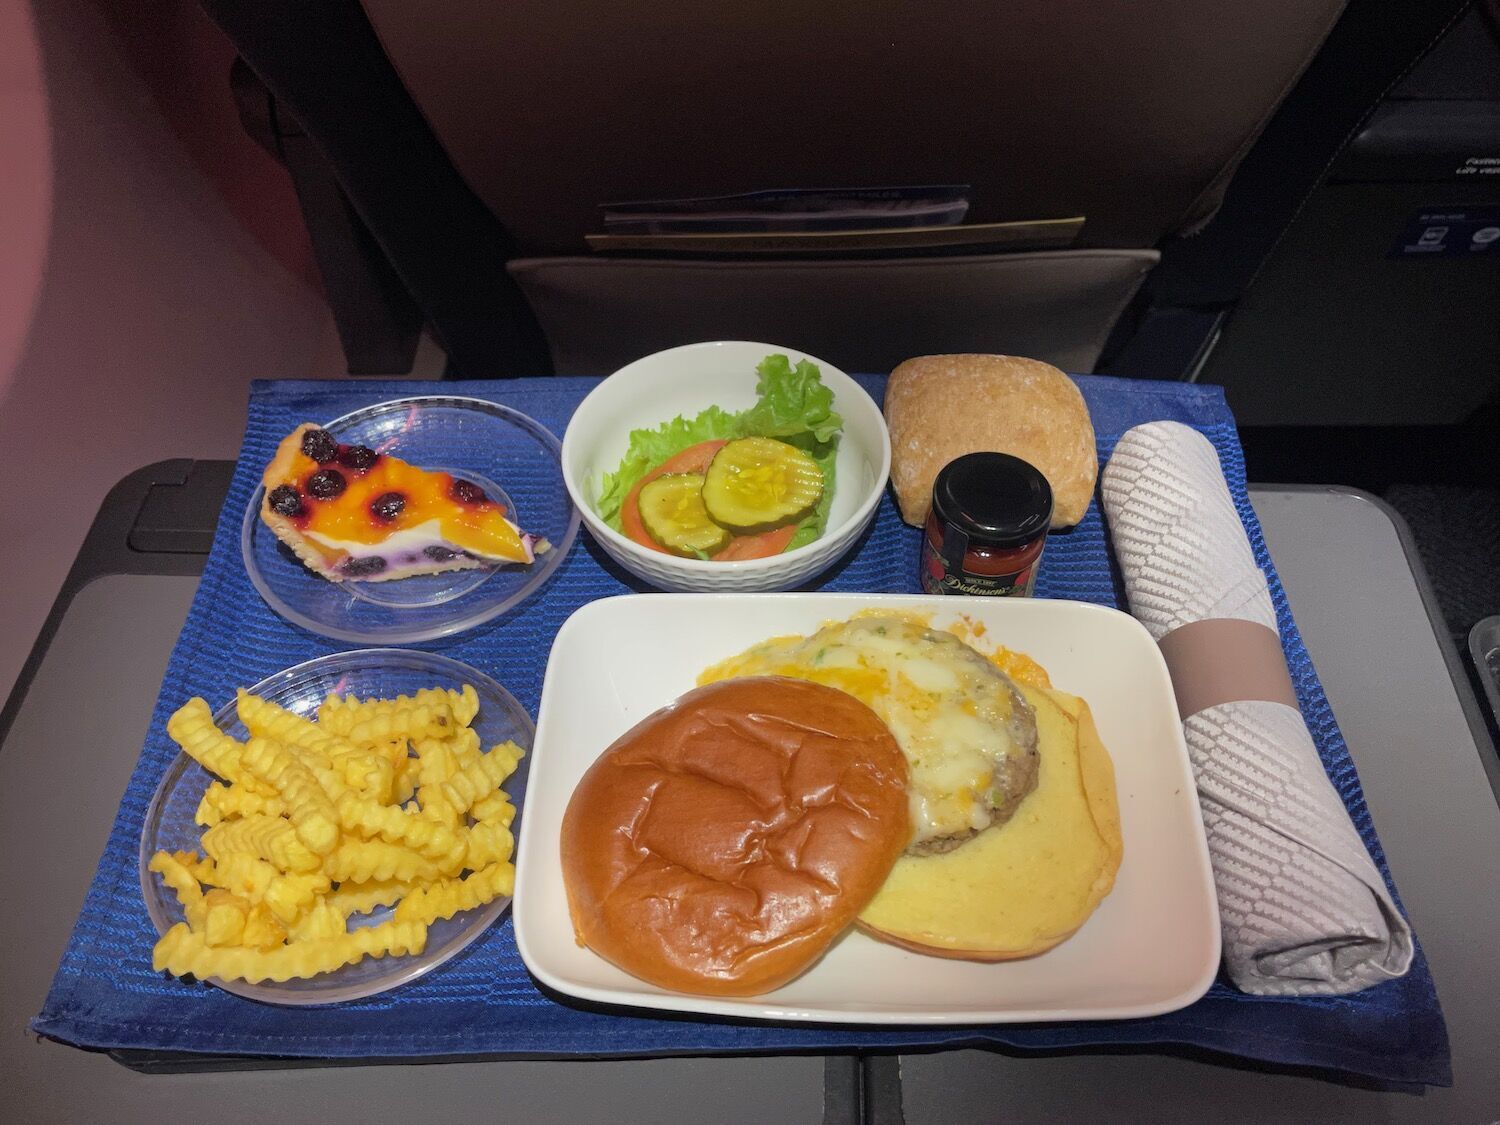 The "most reliable" dish in United Airlines' first class, which is guaranteed to satisfy, has been named